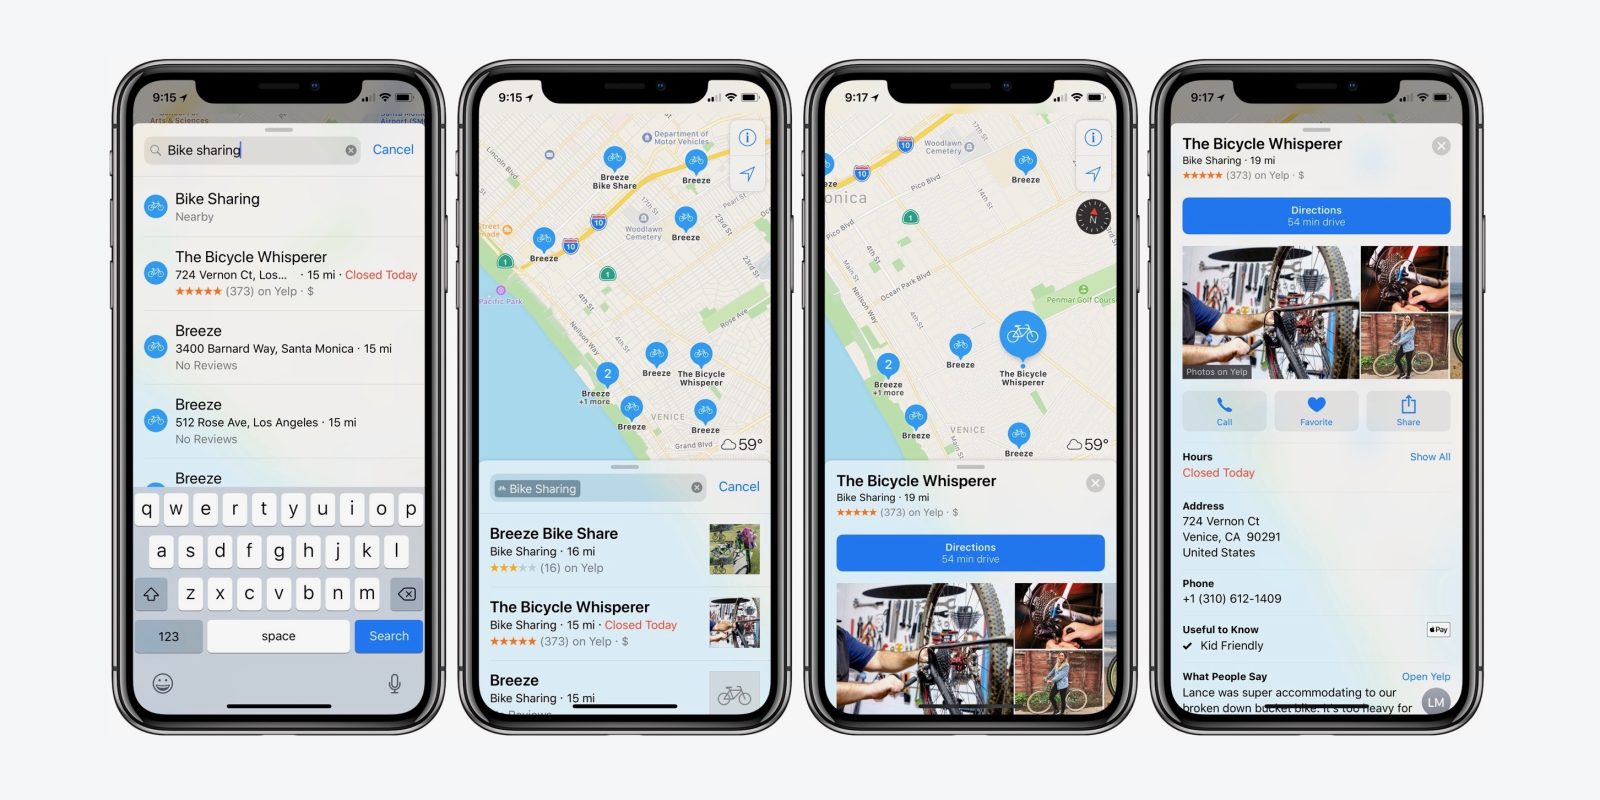 Is Apple Maps better than Google Maps?